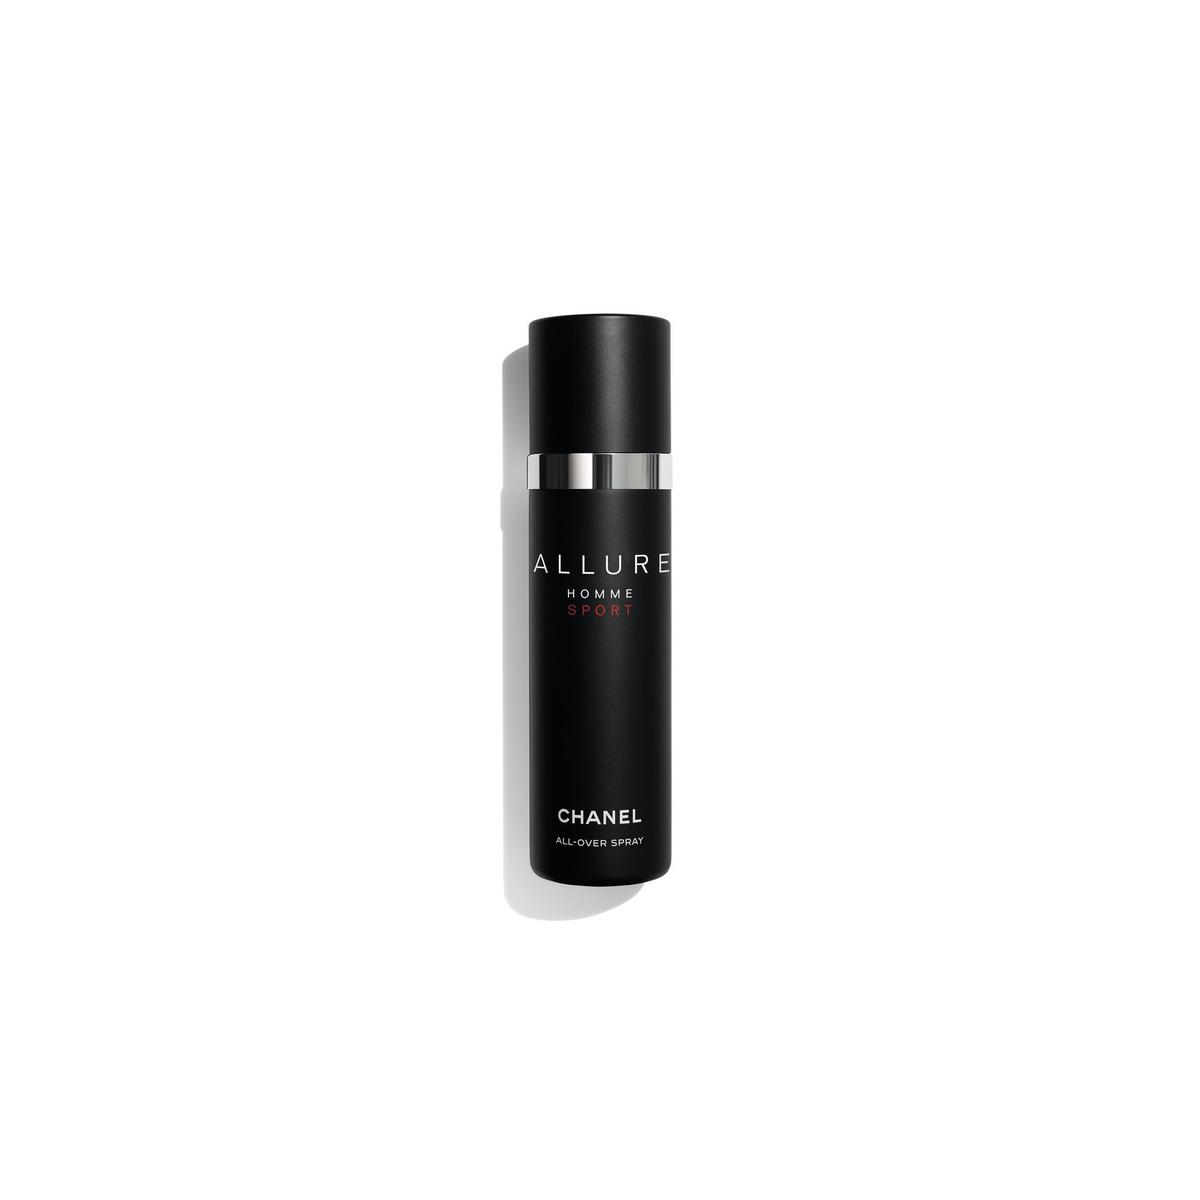 TheDrip — Chanel Allure Homme and Homme Sport Body Sprays - Men's